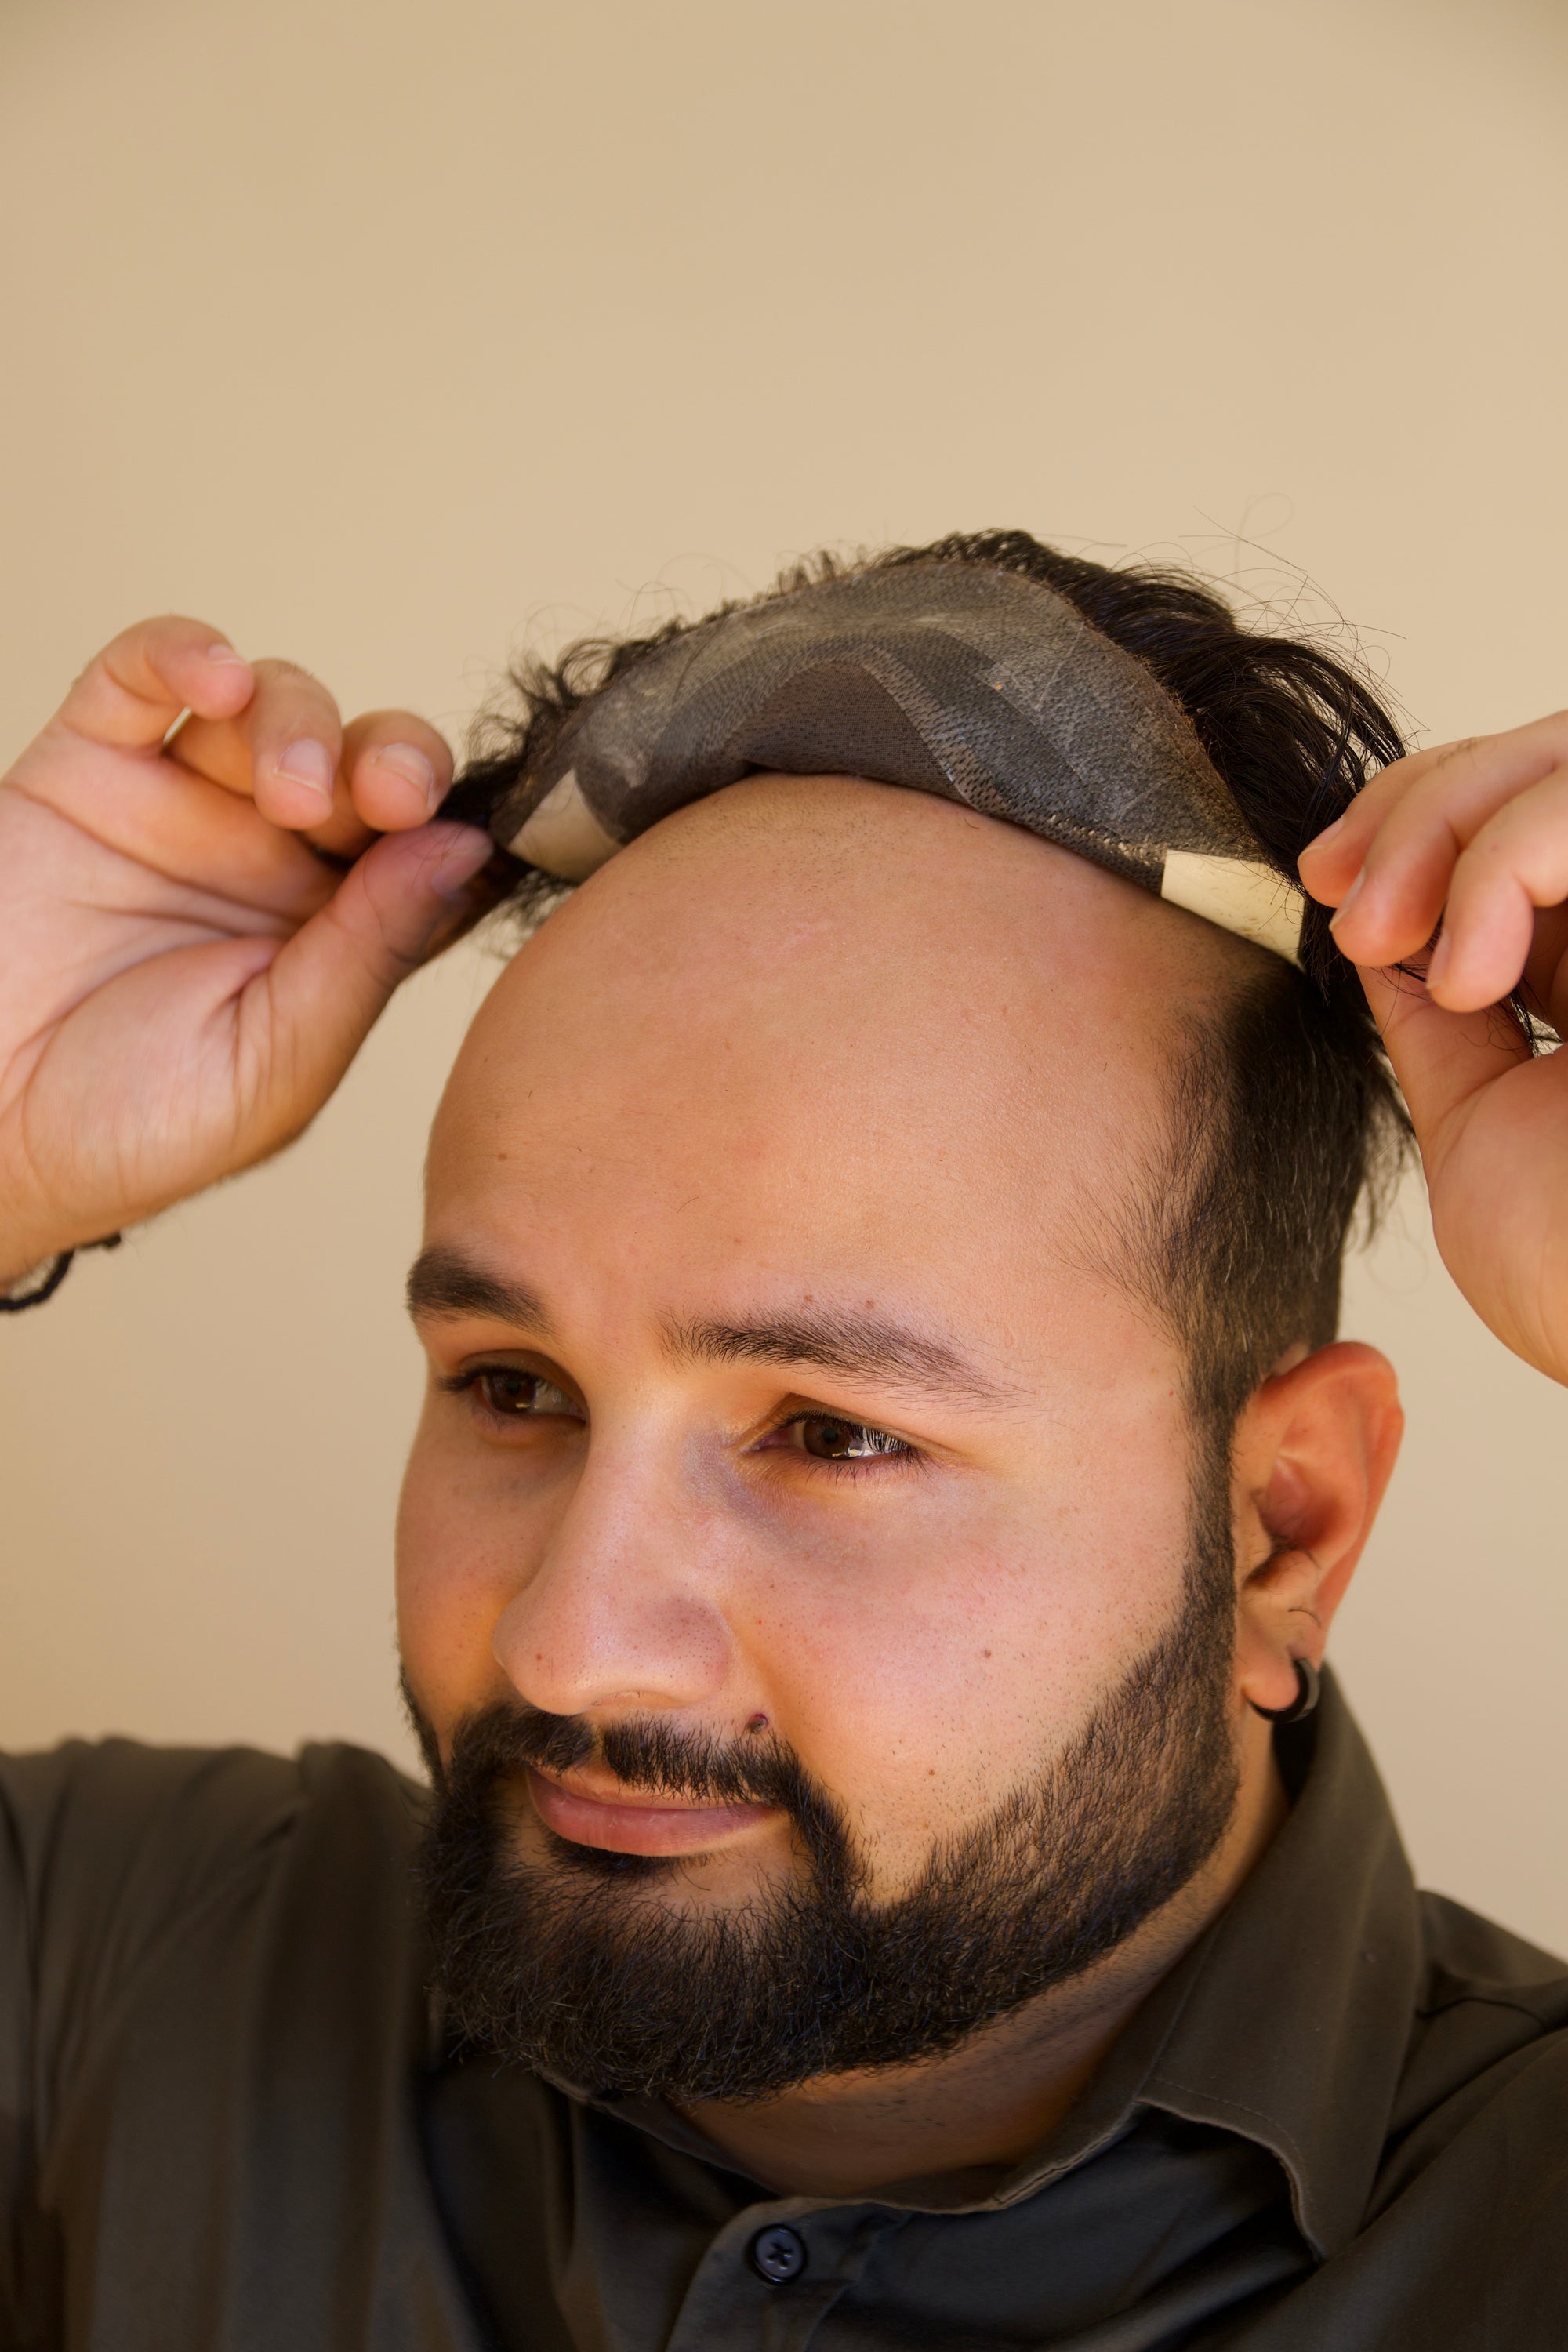 Man putting on hair toupee by himself